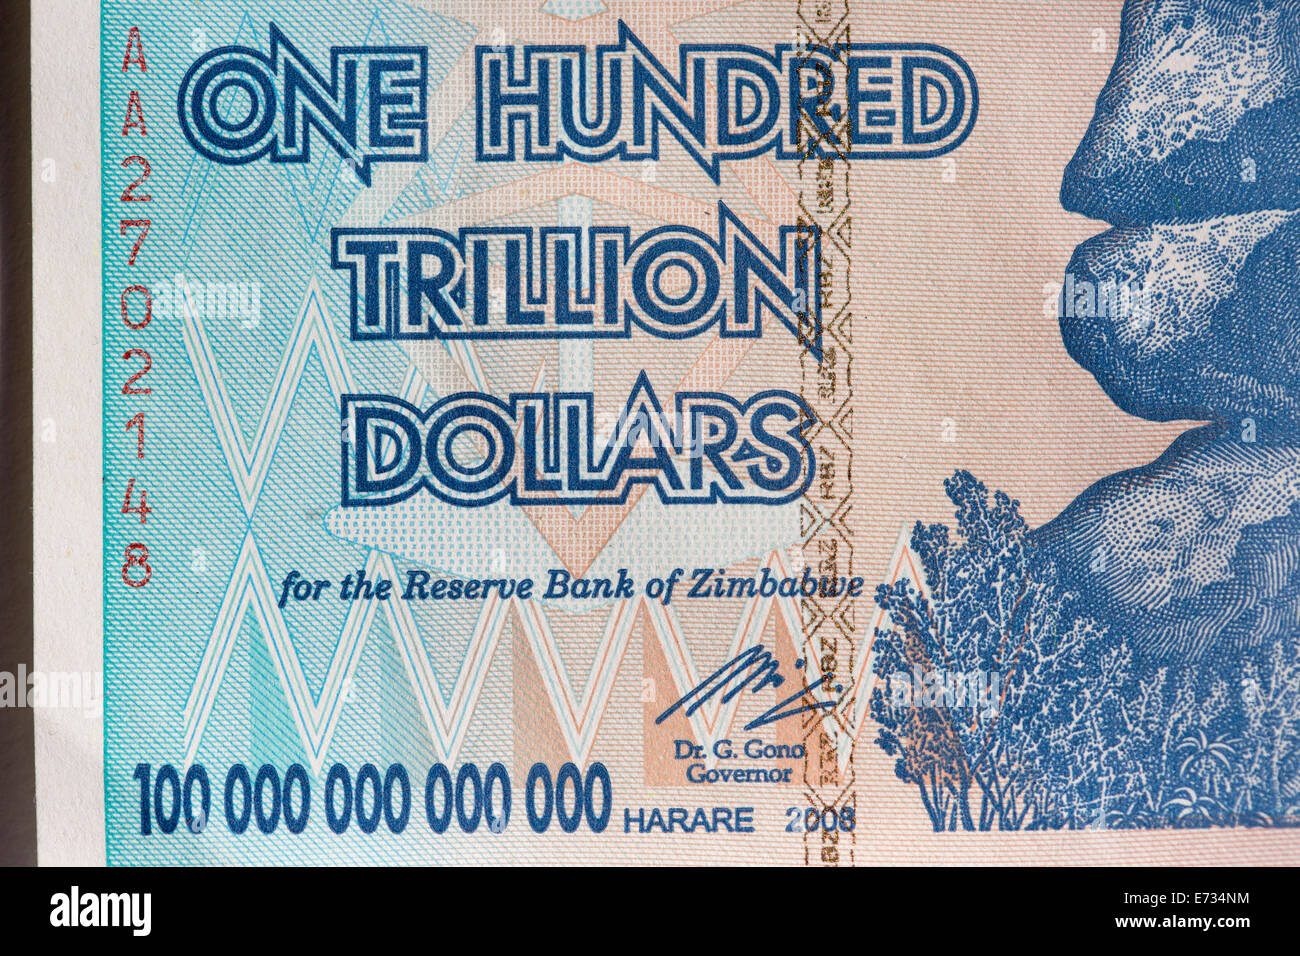 A Zimbabwean one hundred trillion dollar bill as was in circulation in 2008 during the period of hyper-inflation in Zimbabwe Stock Photo